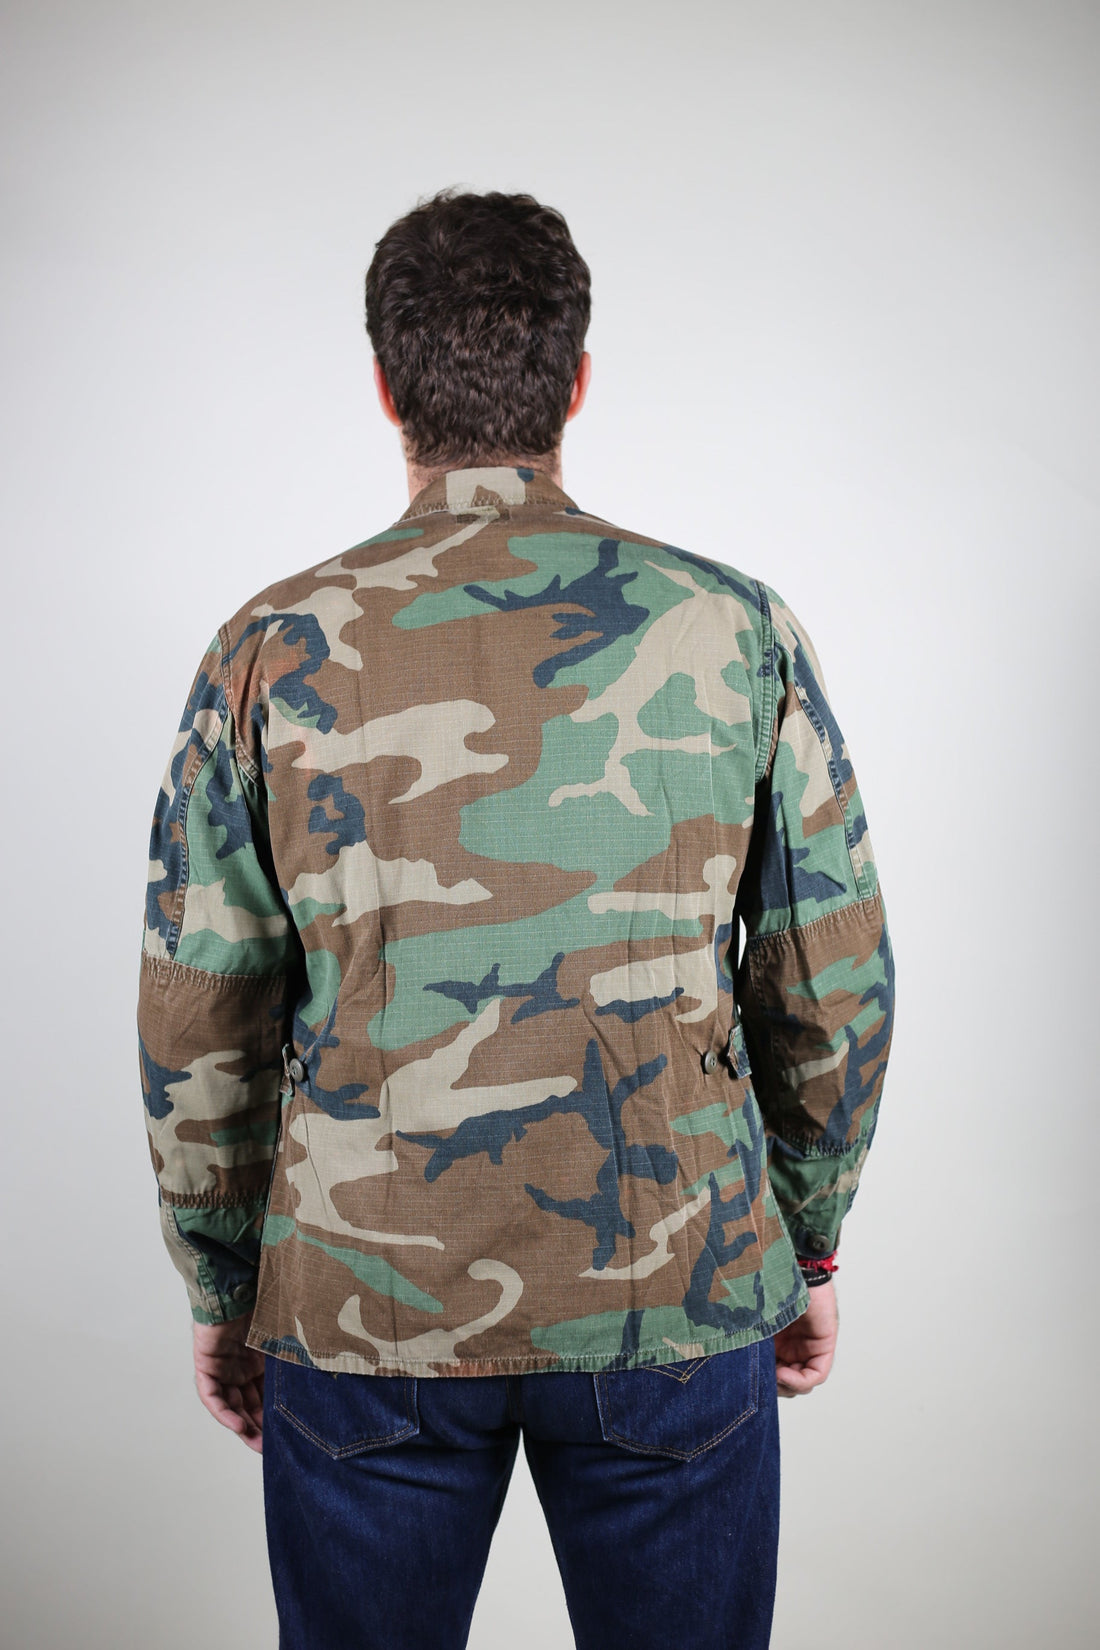 Giacca camouflage BDU WOODLAND  Us Air Force  - S -